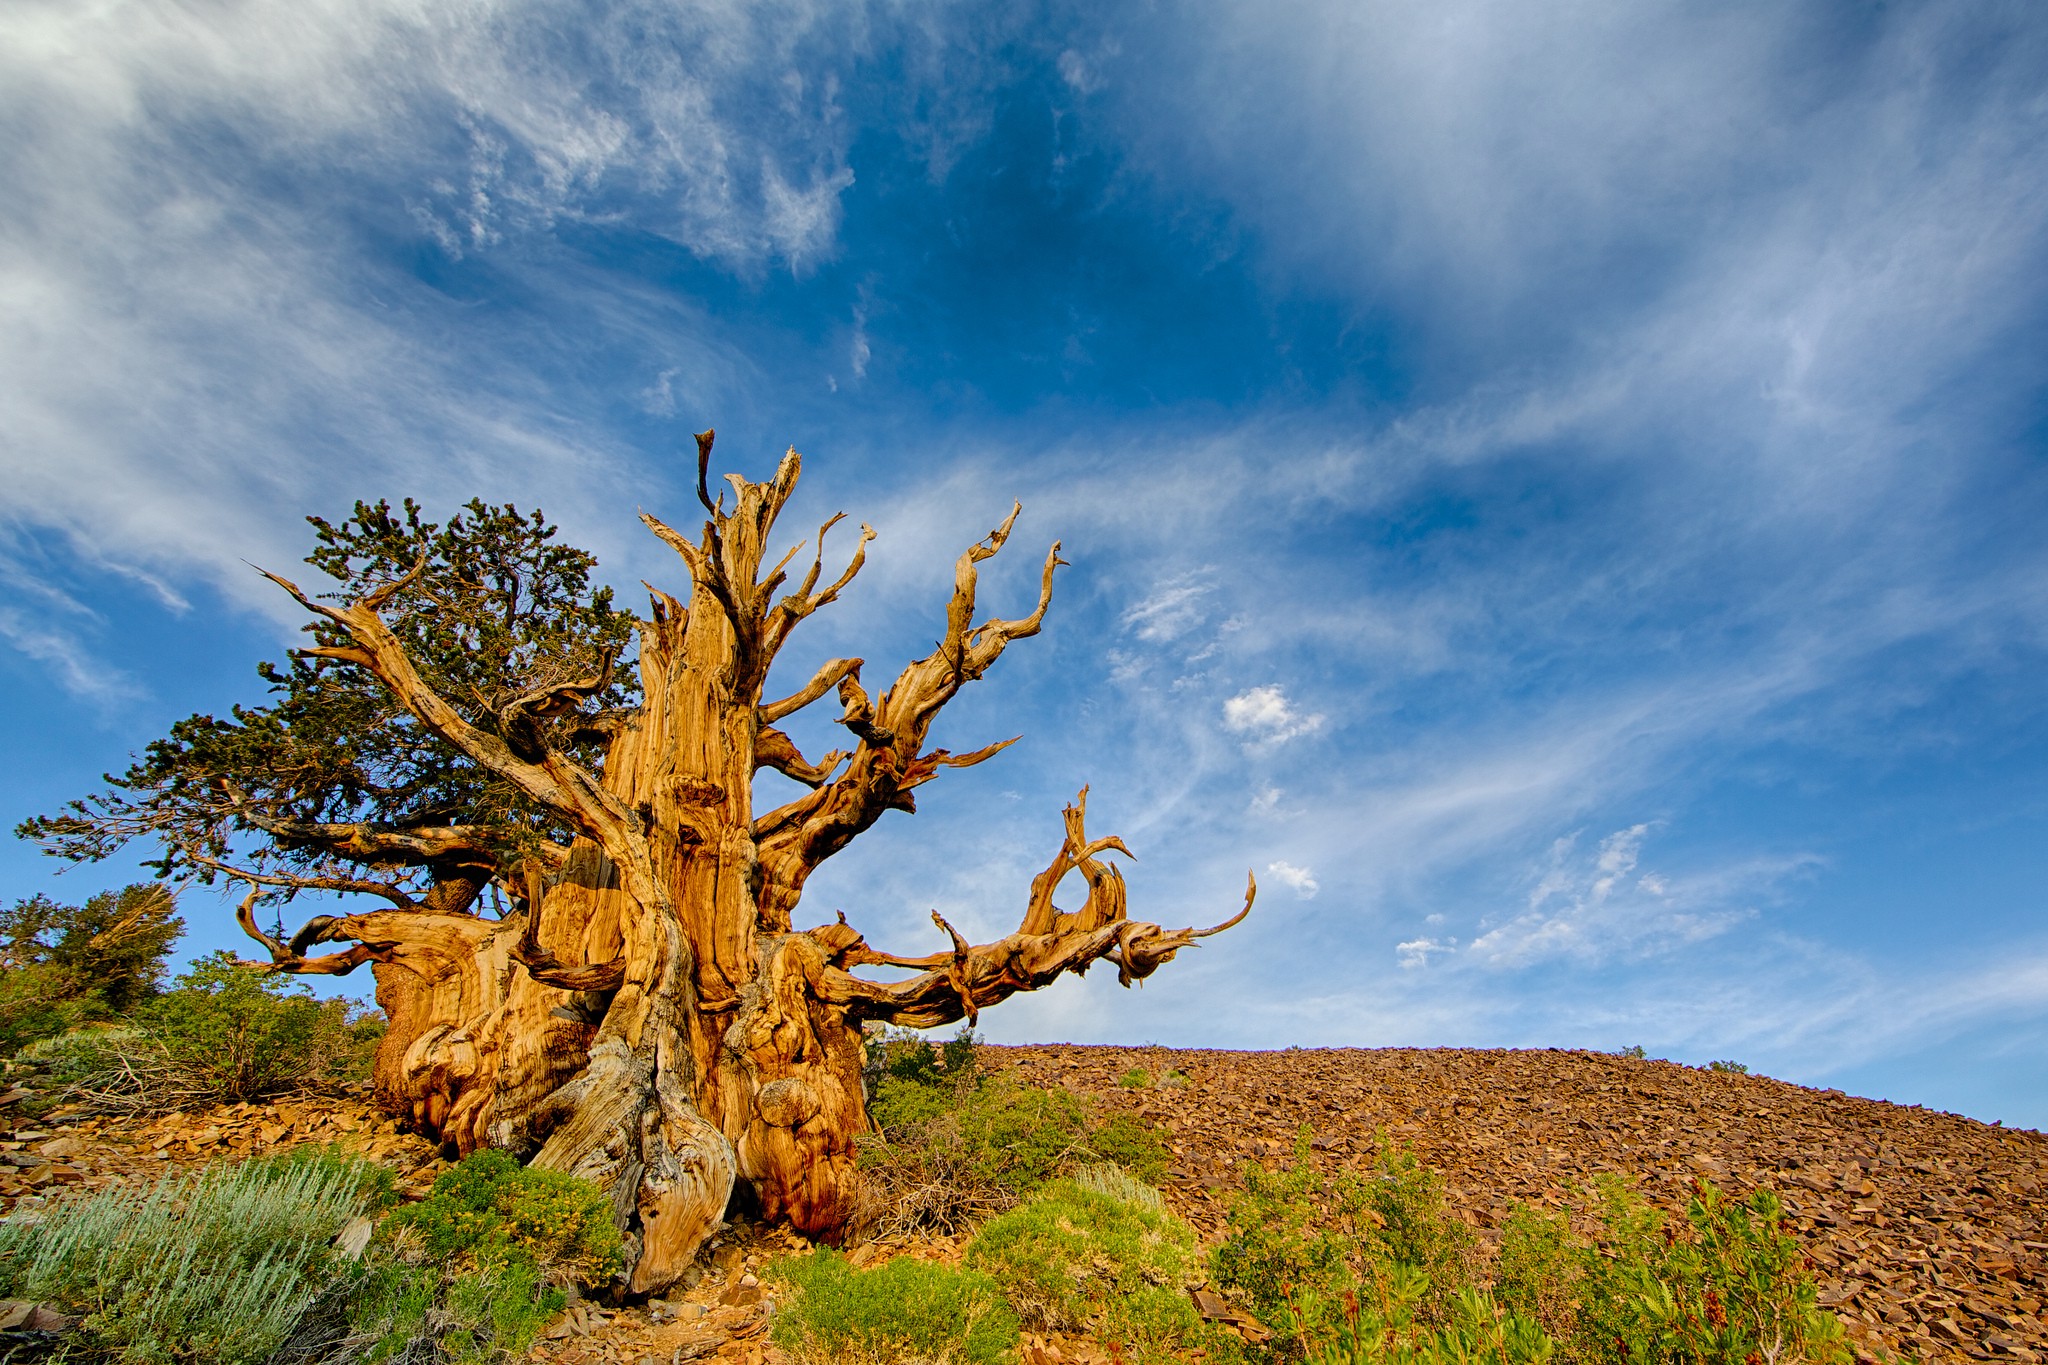 The 5 Strange Trees, which the wonders of Nature in the World.